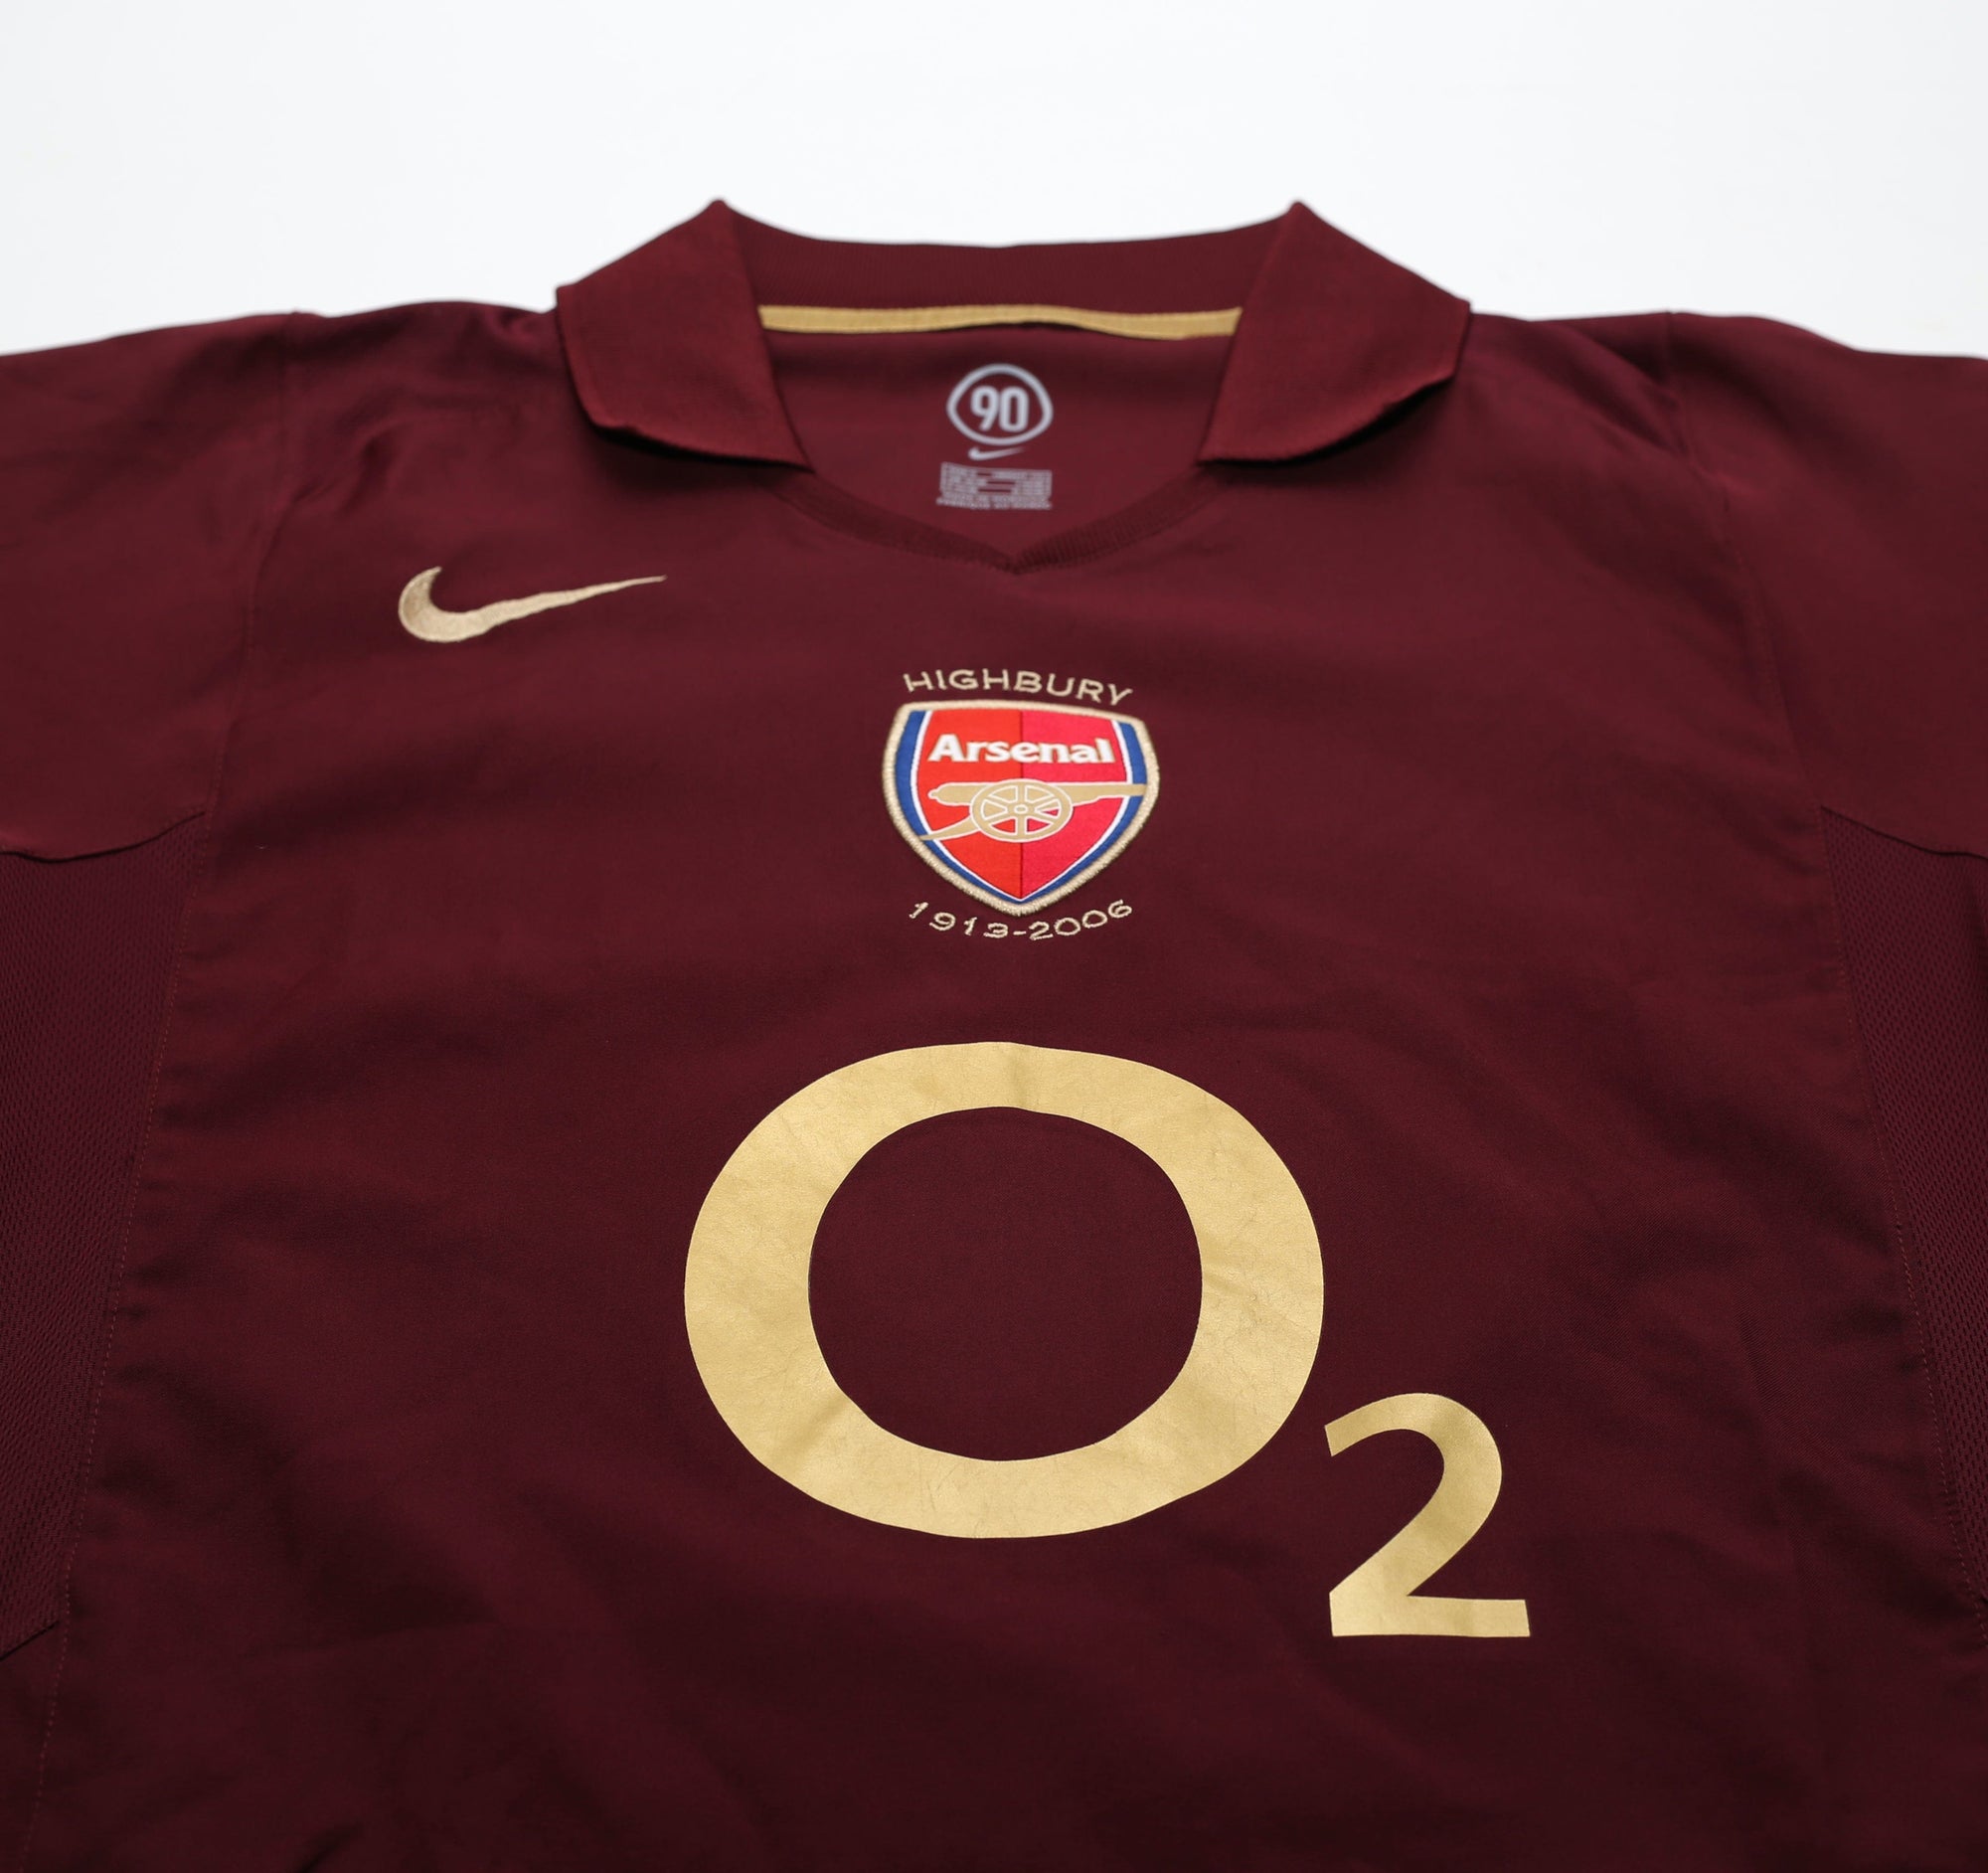 2005/06 PIRES #7 Arsenal Vintage Nike UCL Home Football Shirt Jersey (S)